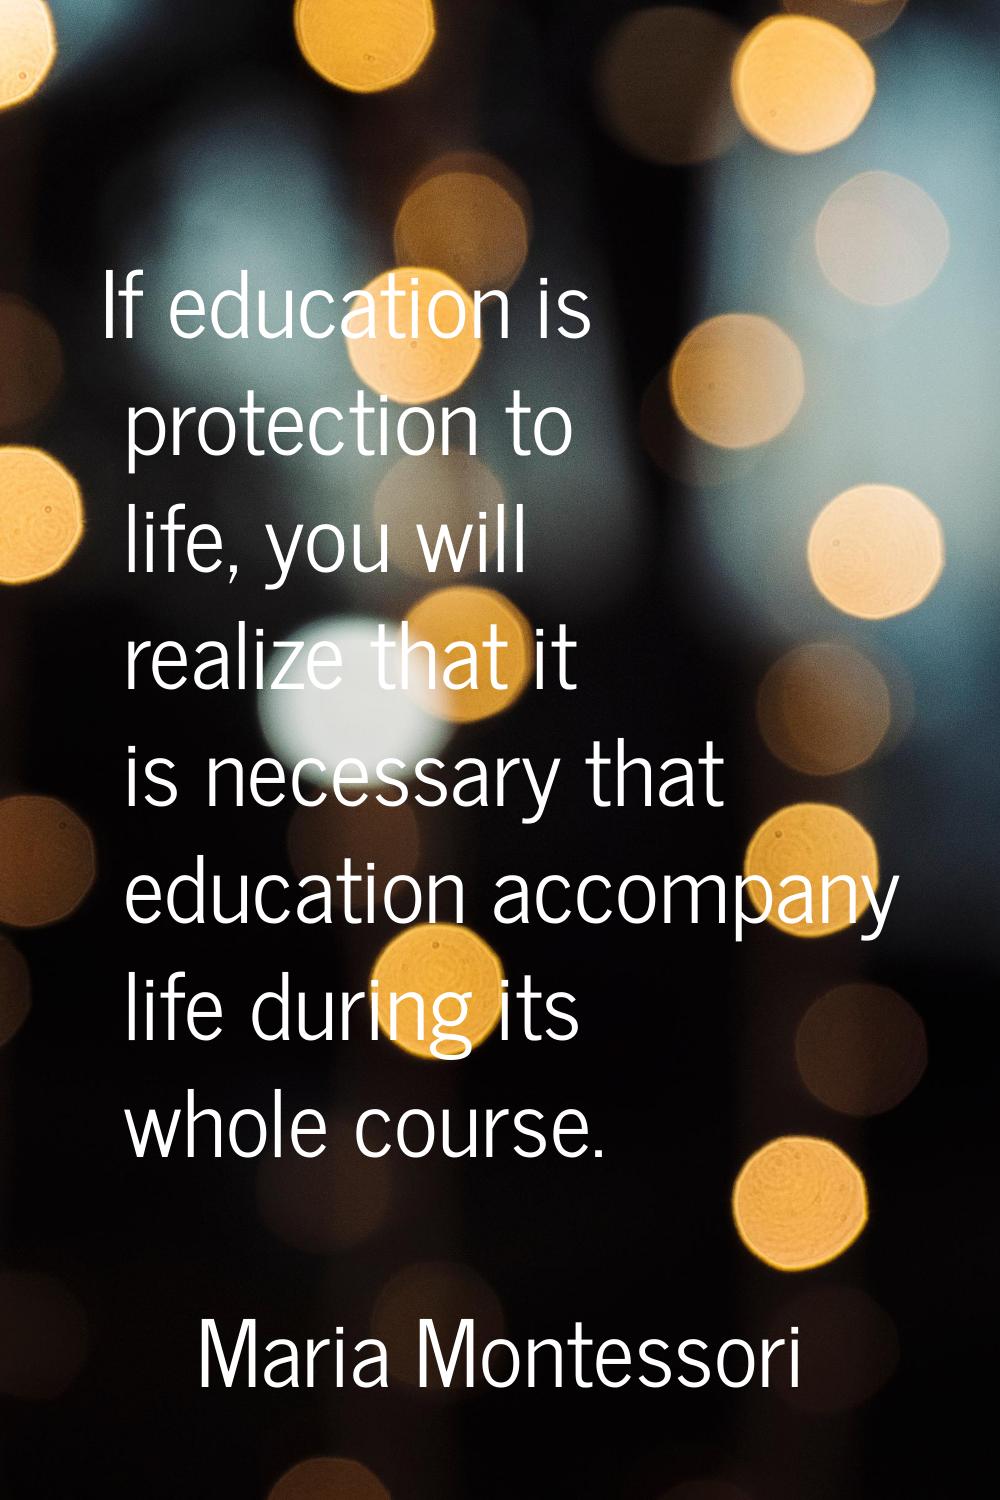 If education is protection to life, you will realize that it is necessary that education accompany 